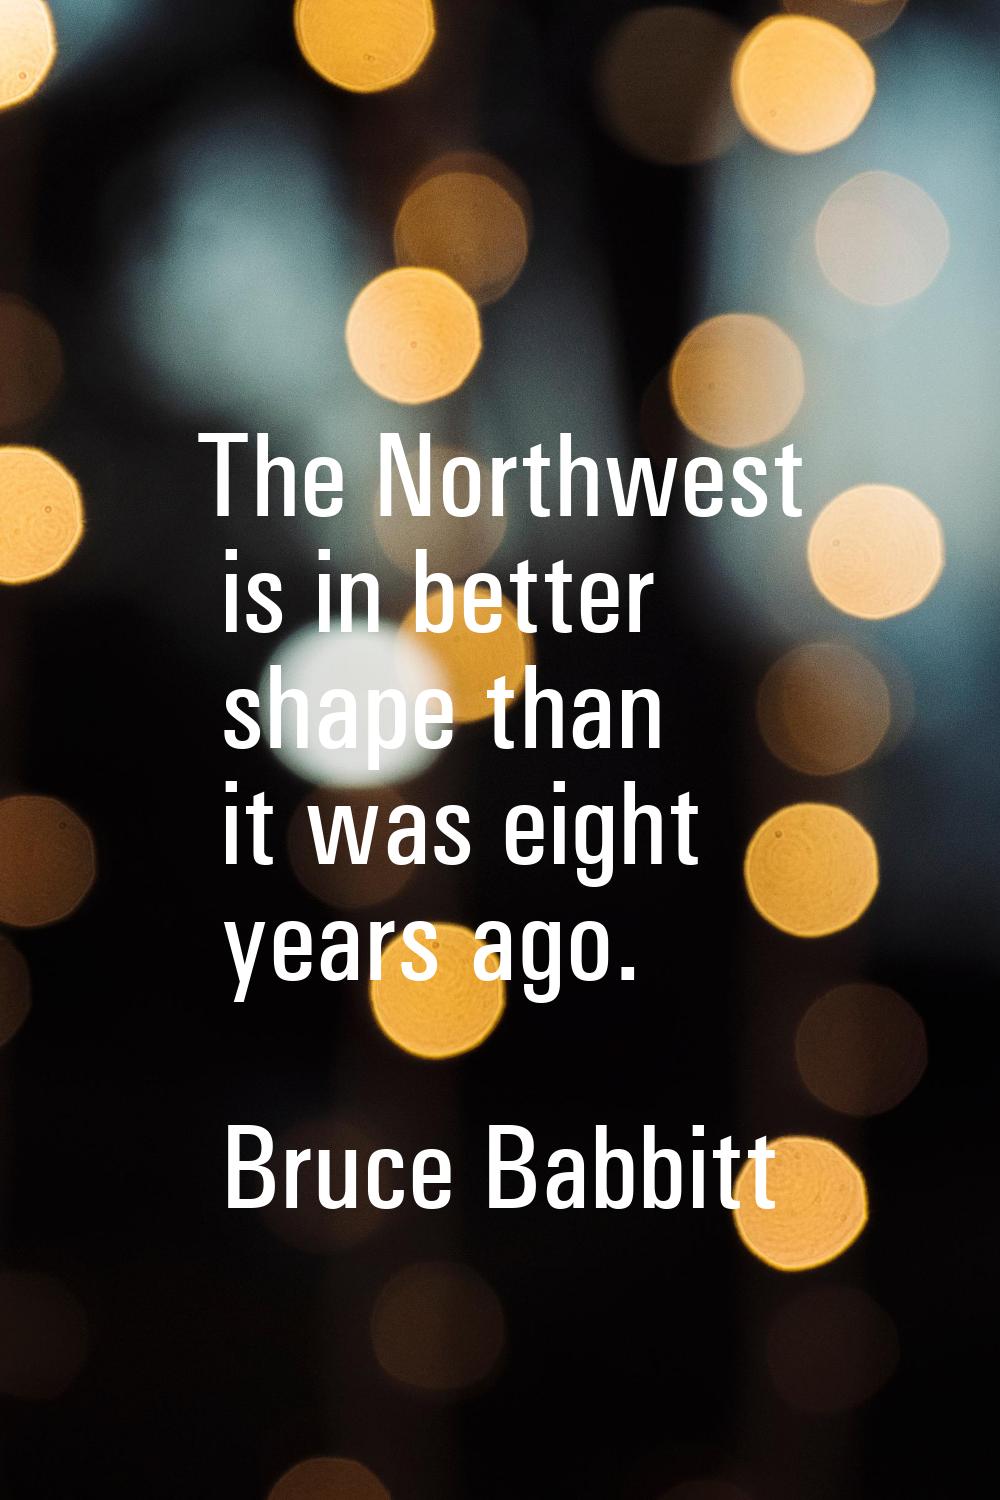 The Northwest is in better shape than it was eight years ago.